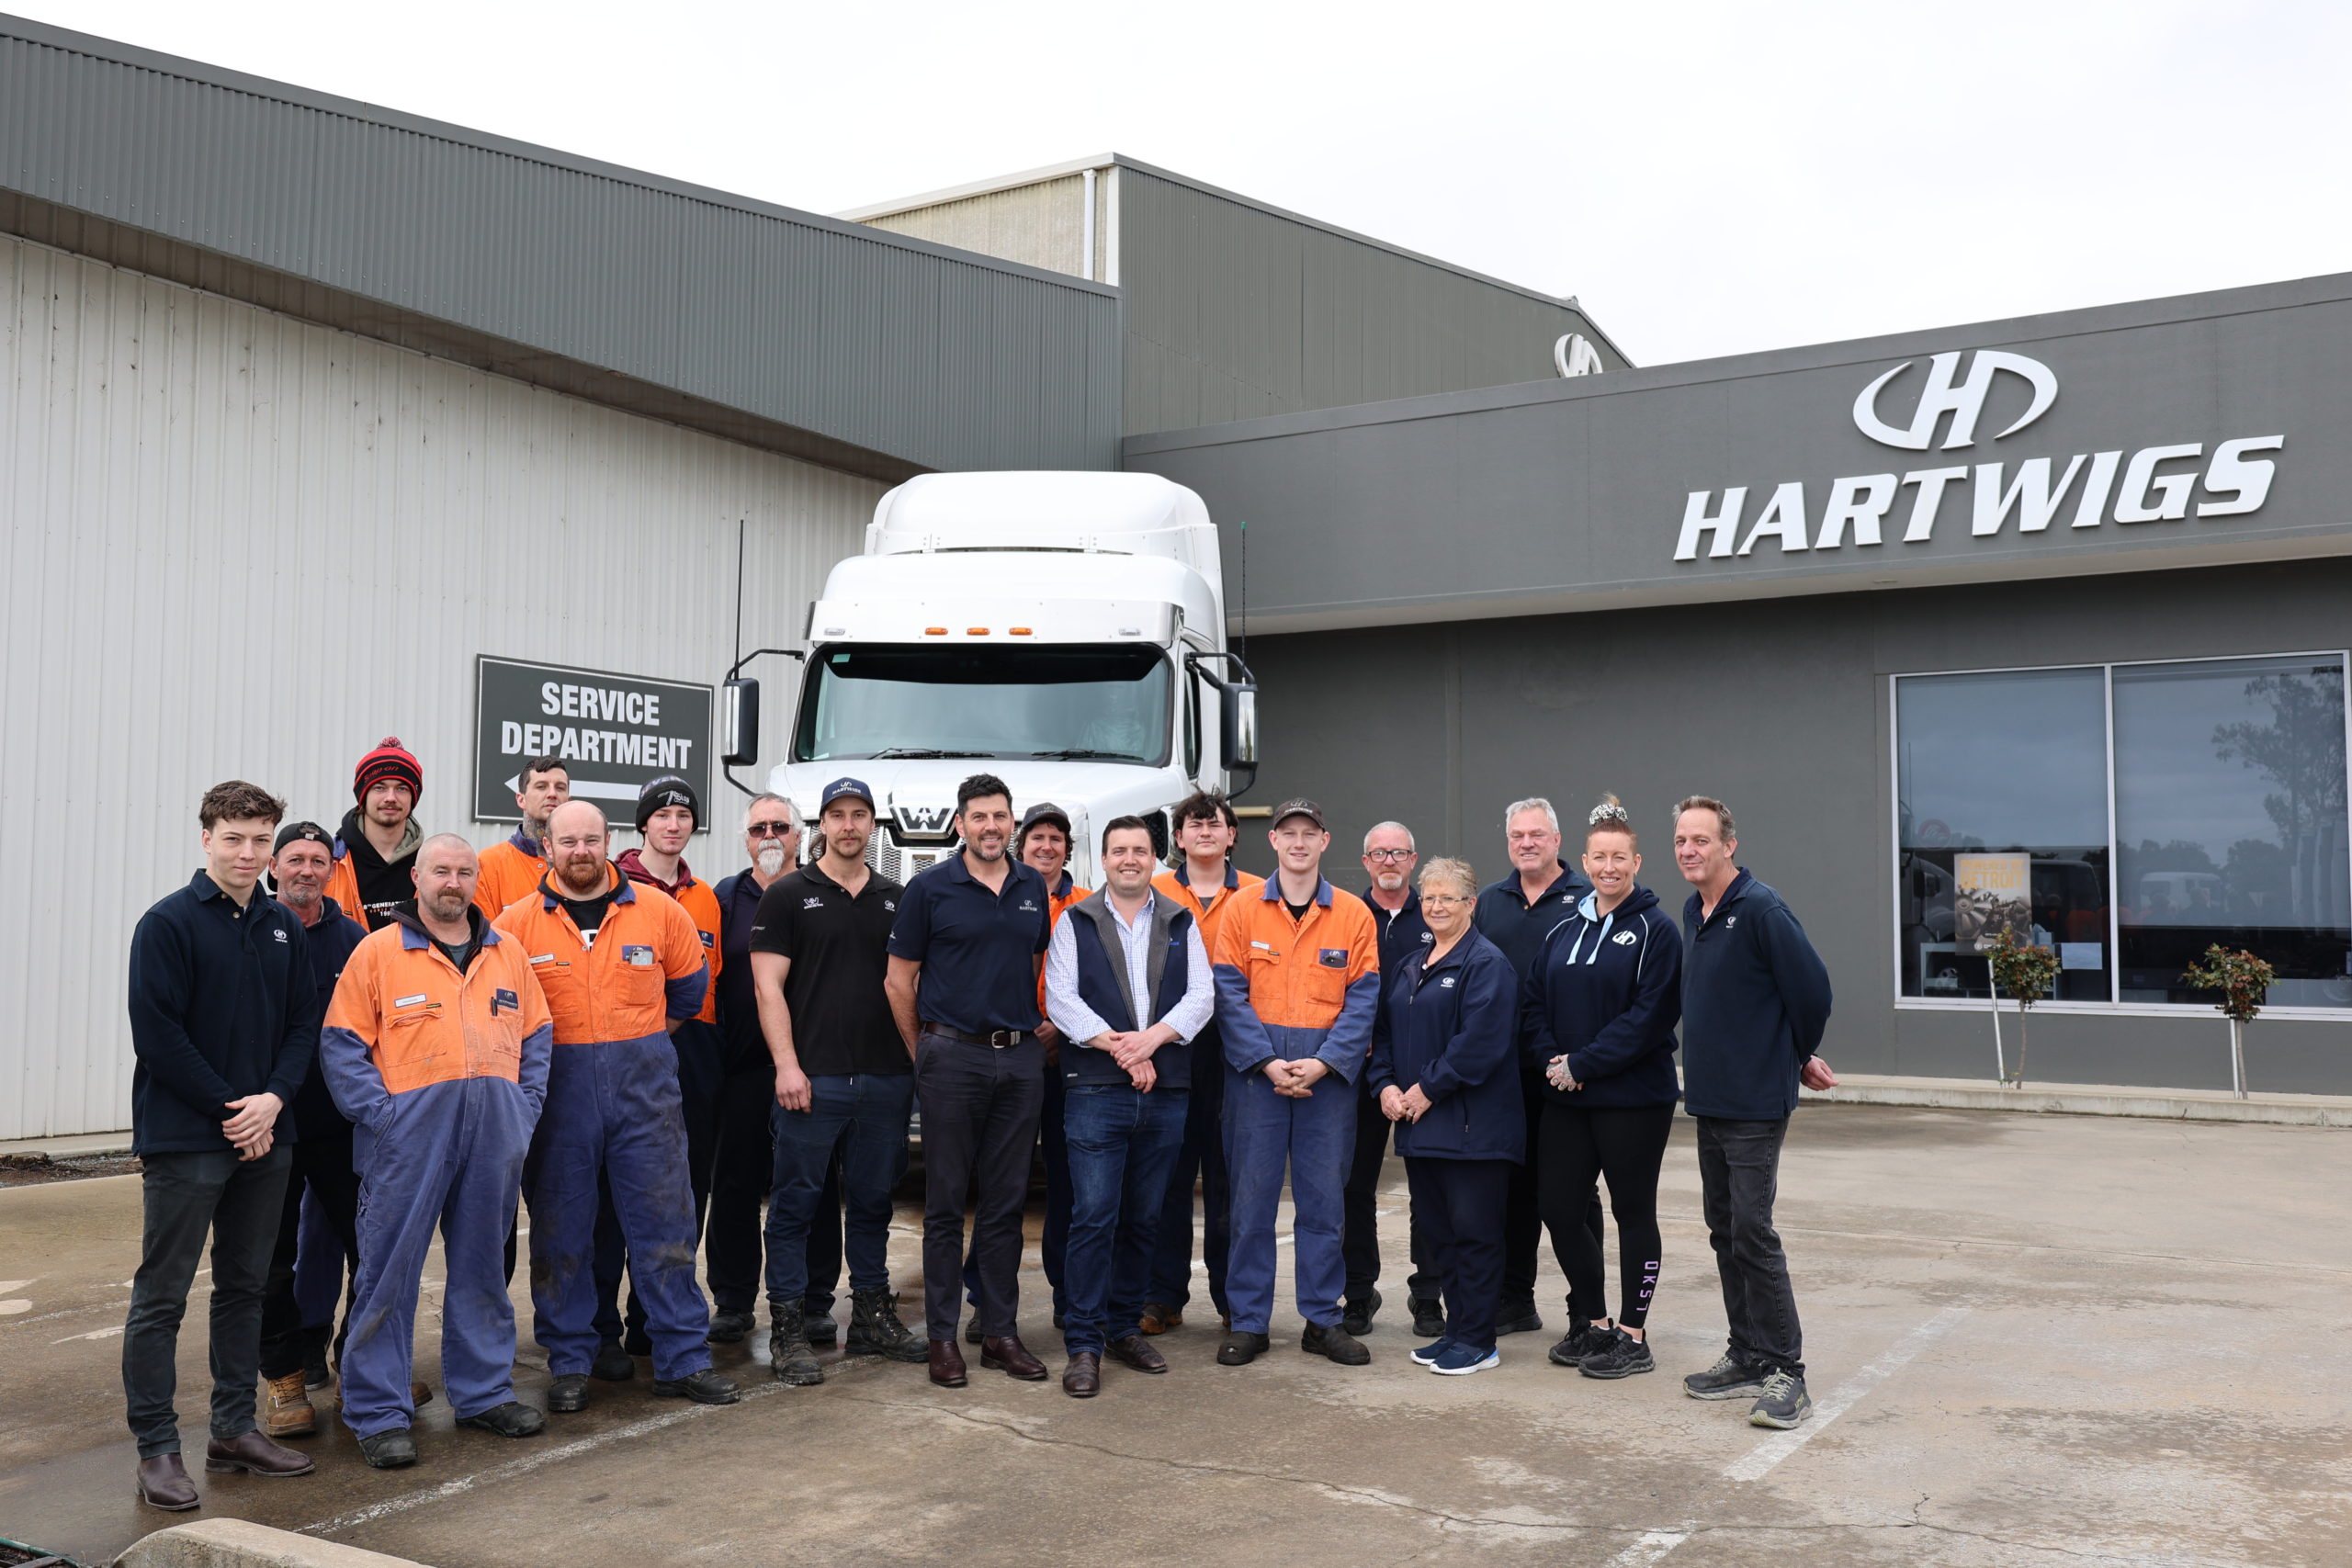 Penske Dealer, Hartwigs, Celebrates 100 Years and Expanded Capability